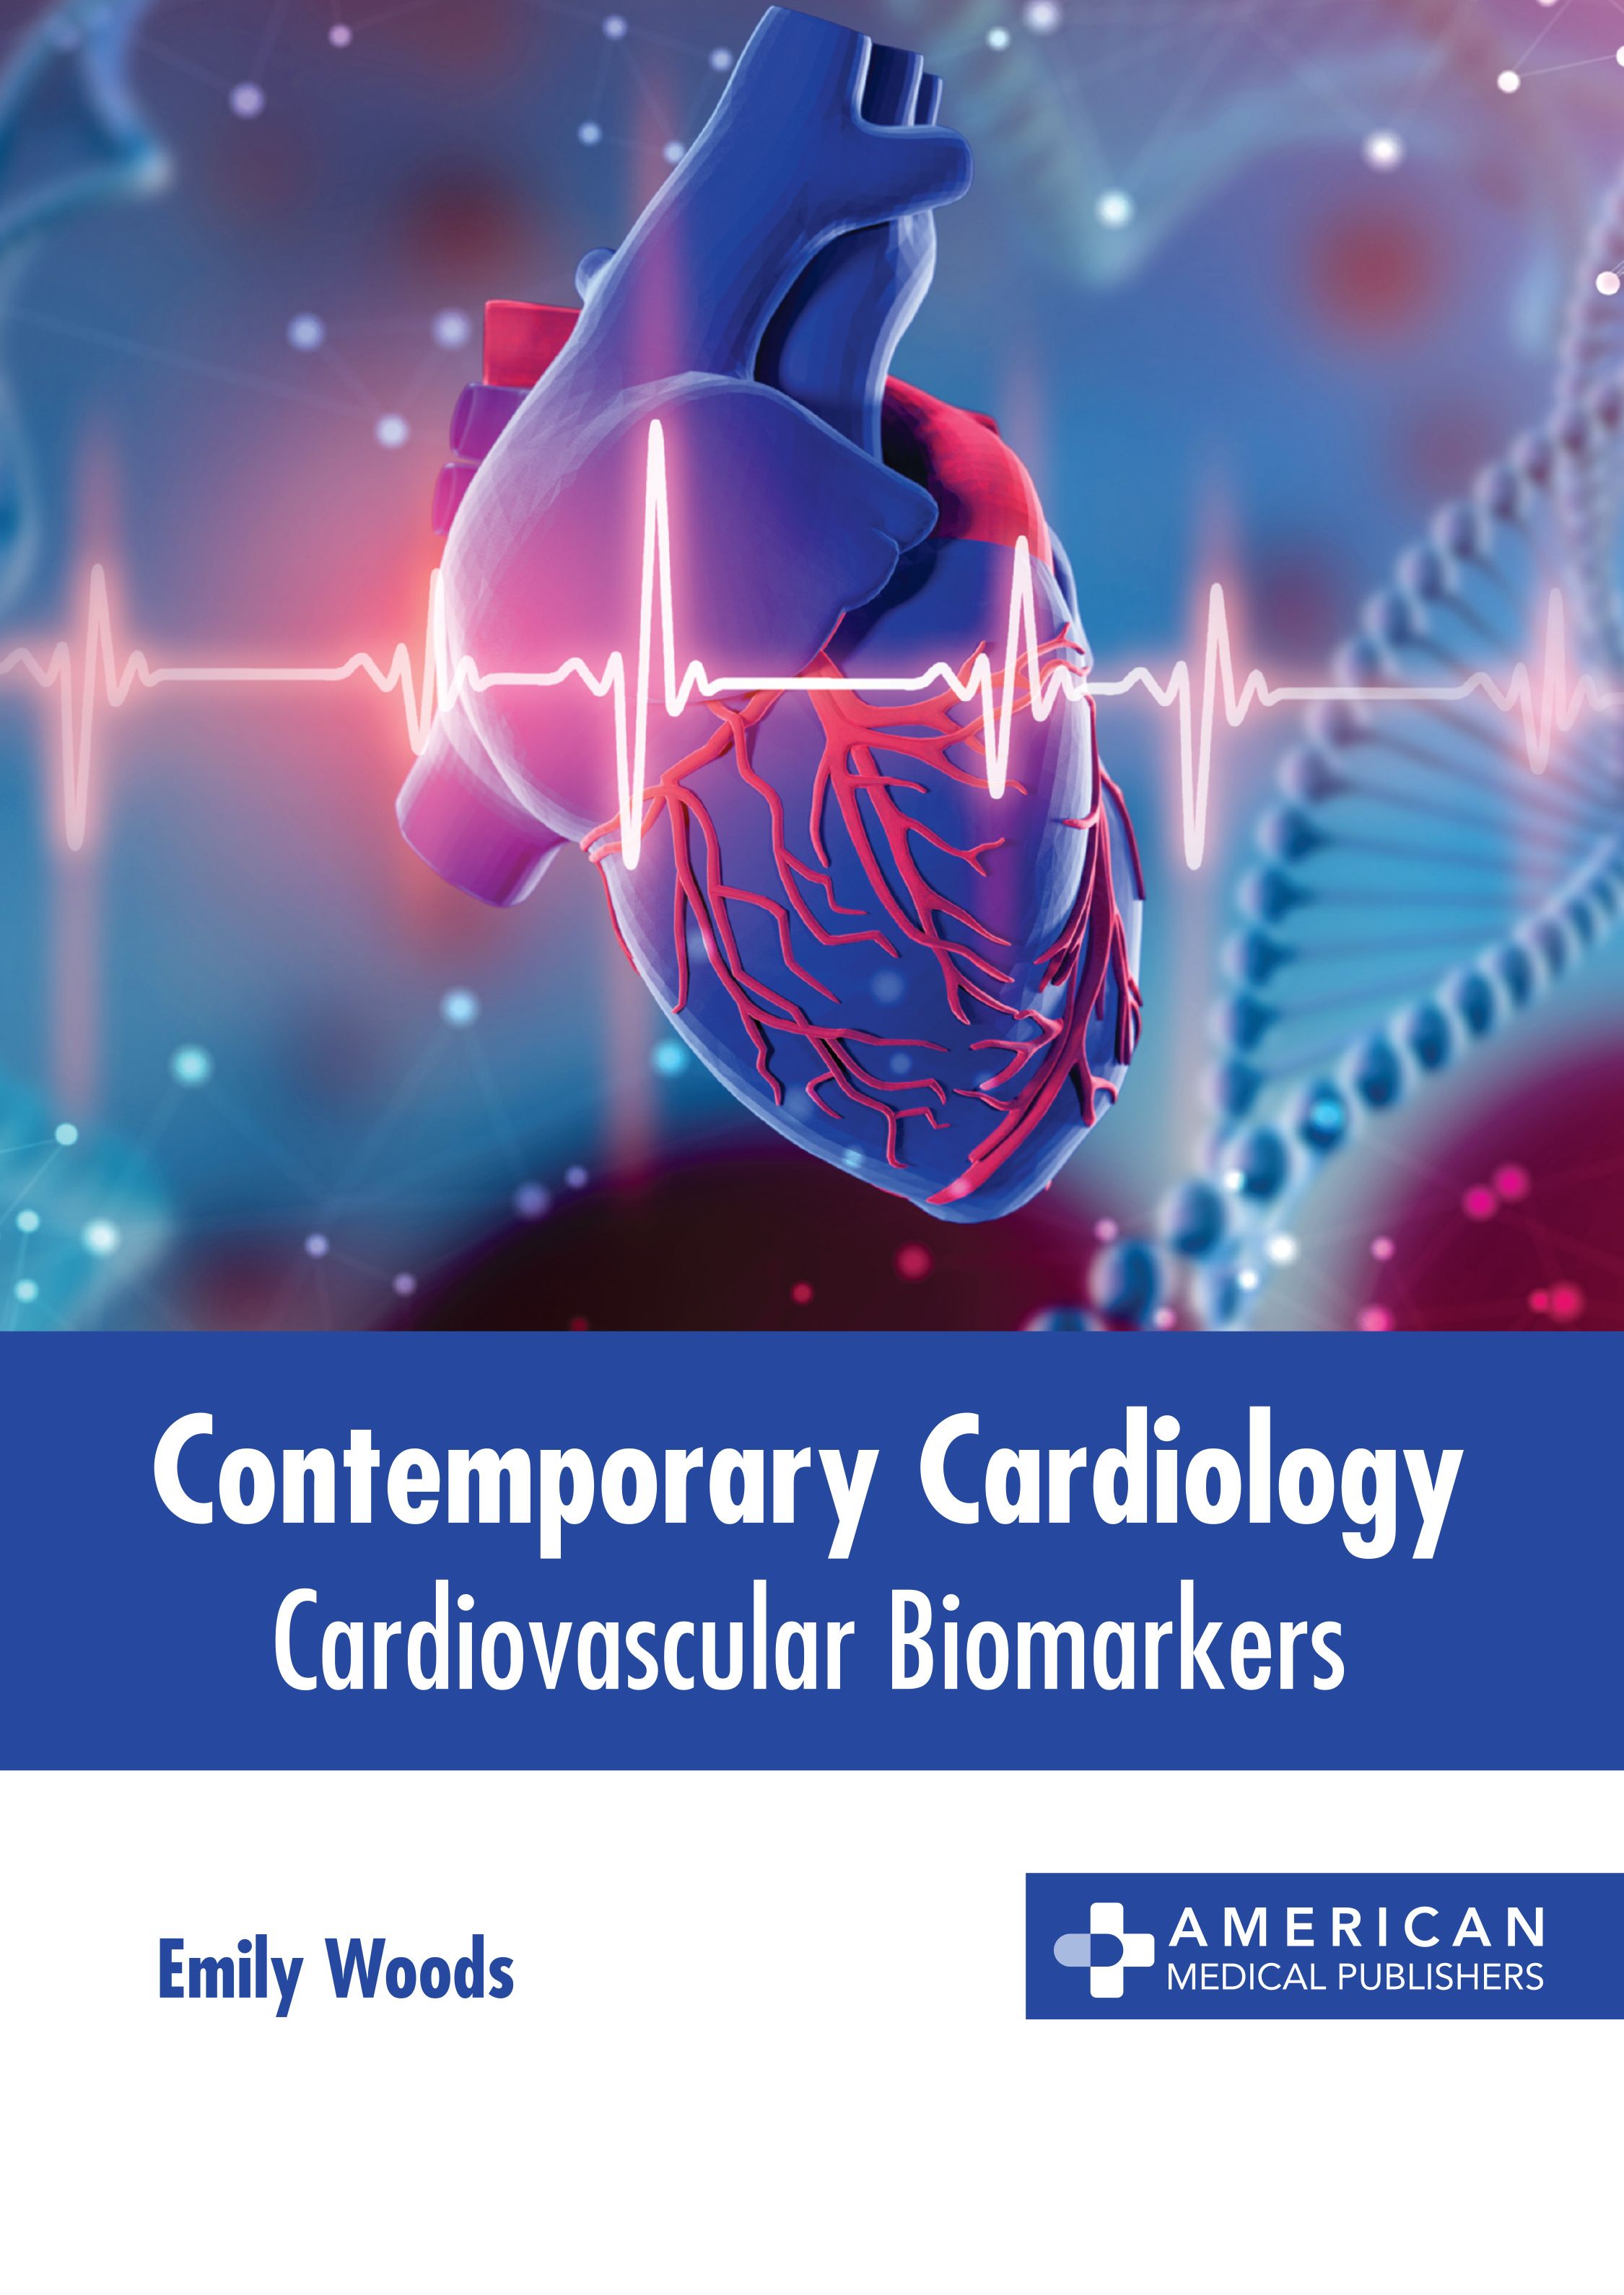 CONTEMPORARY CARDIOLOGY: CARDIOVASCULAR BIOMARKERS